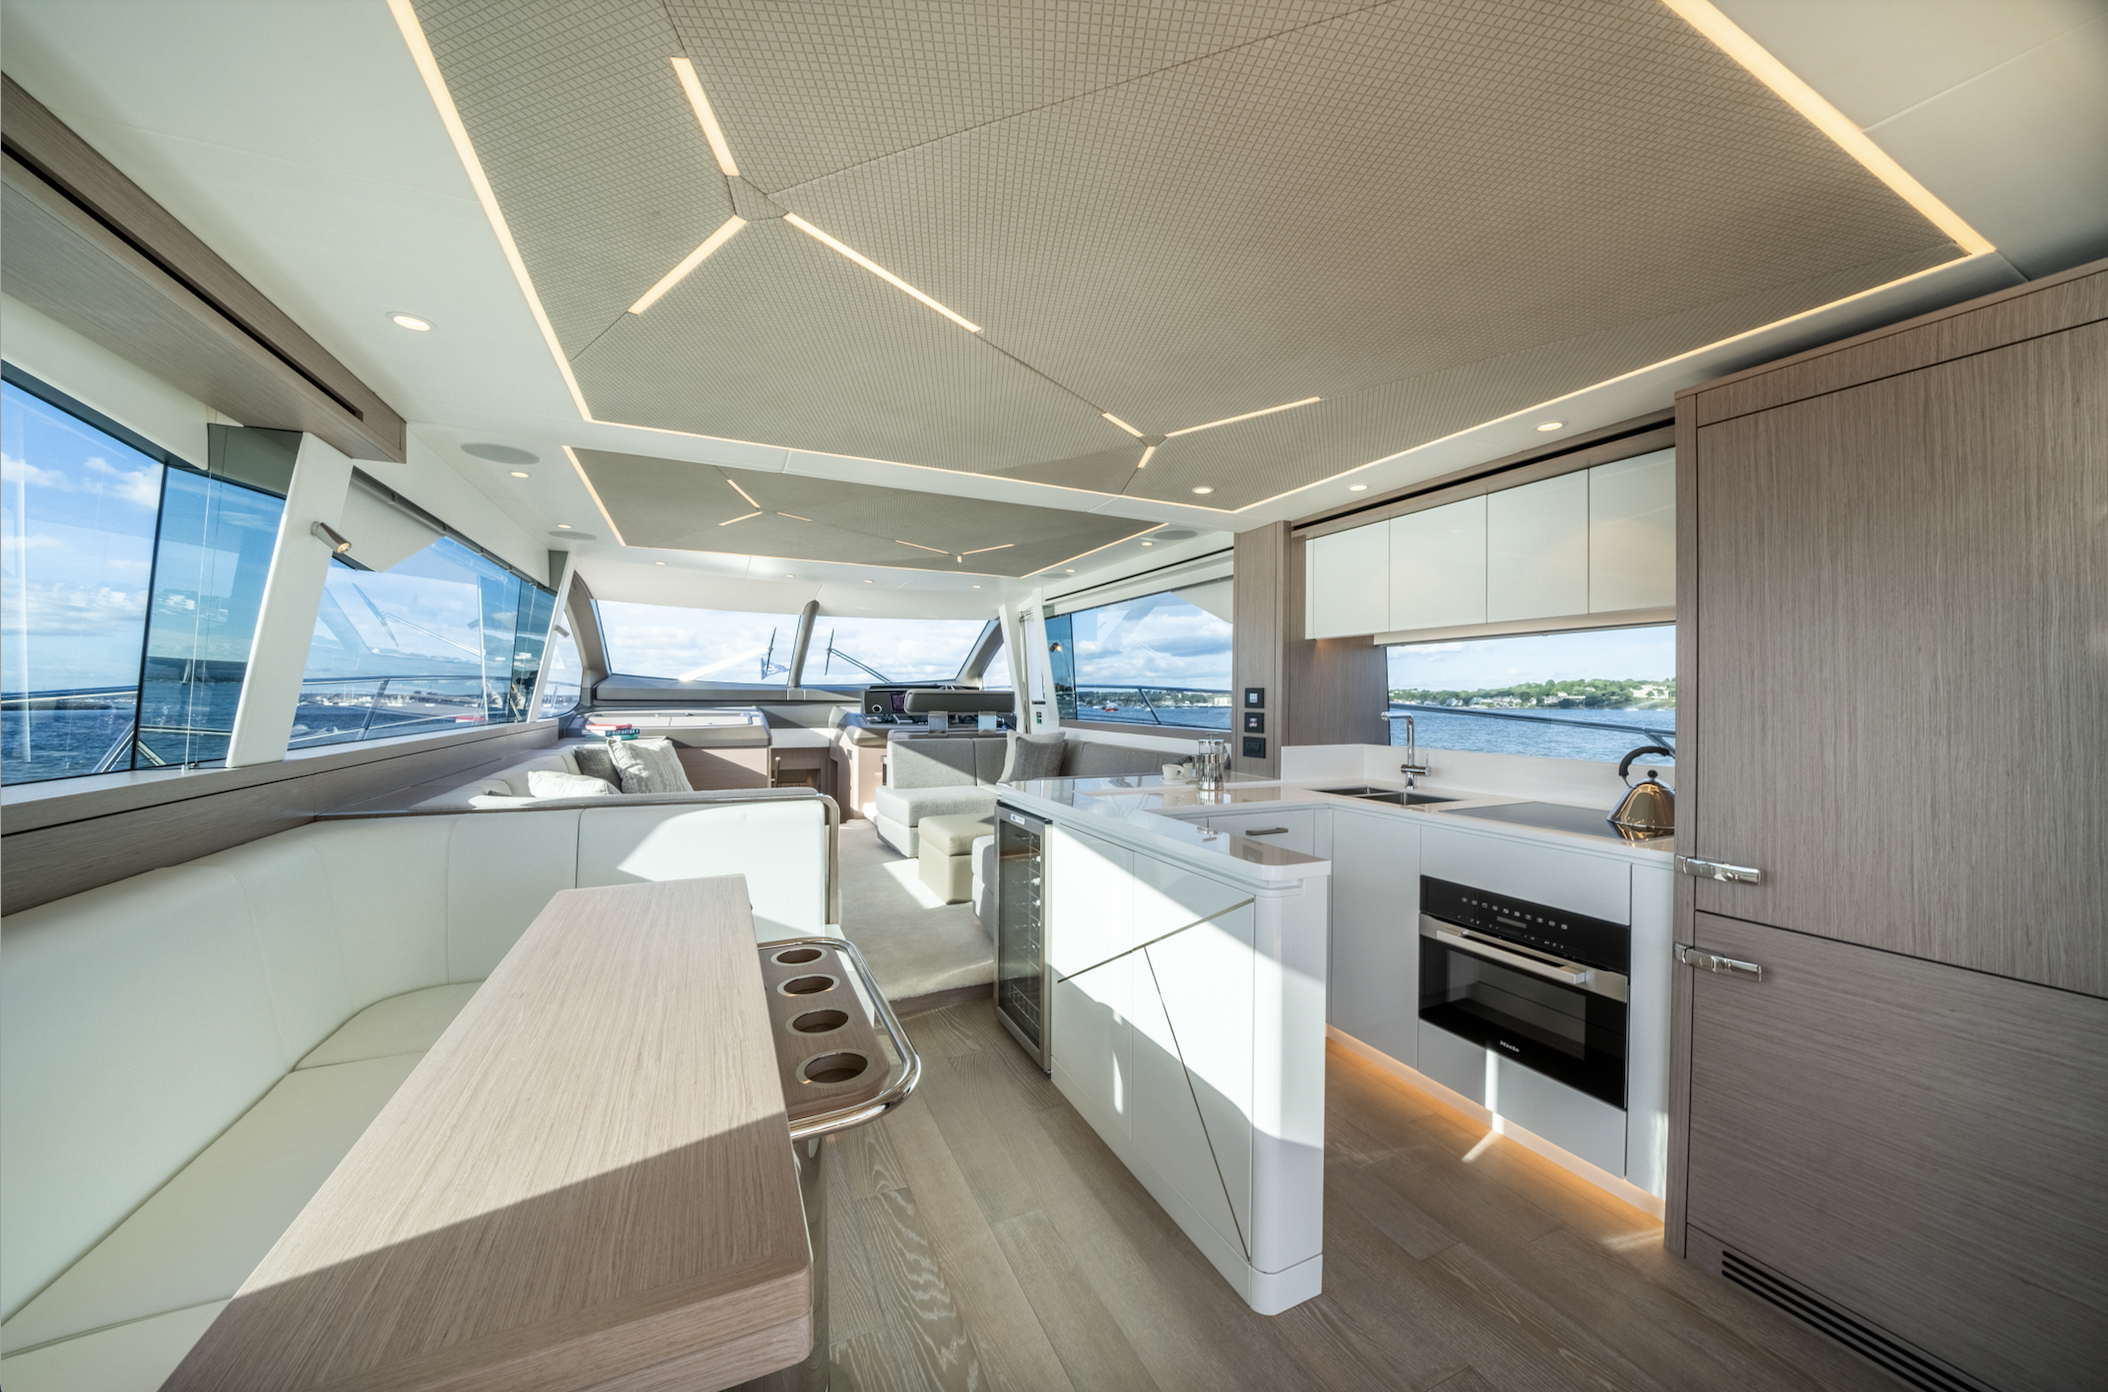 Galley angle onboard Sunseeker Manahattan 68 Pacific